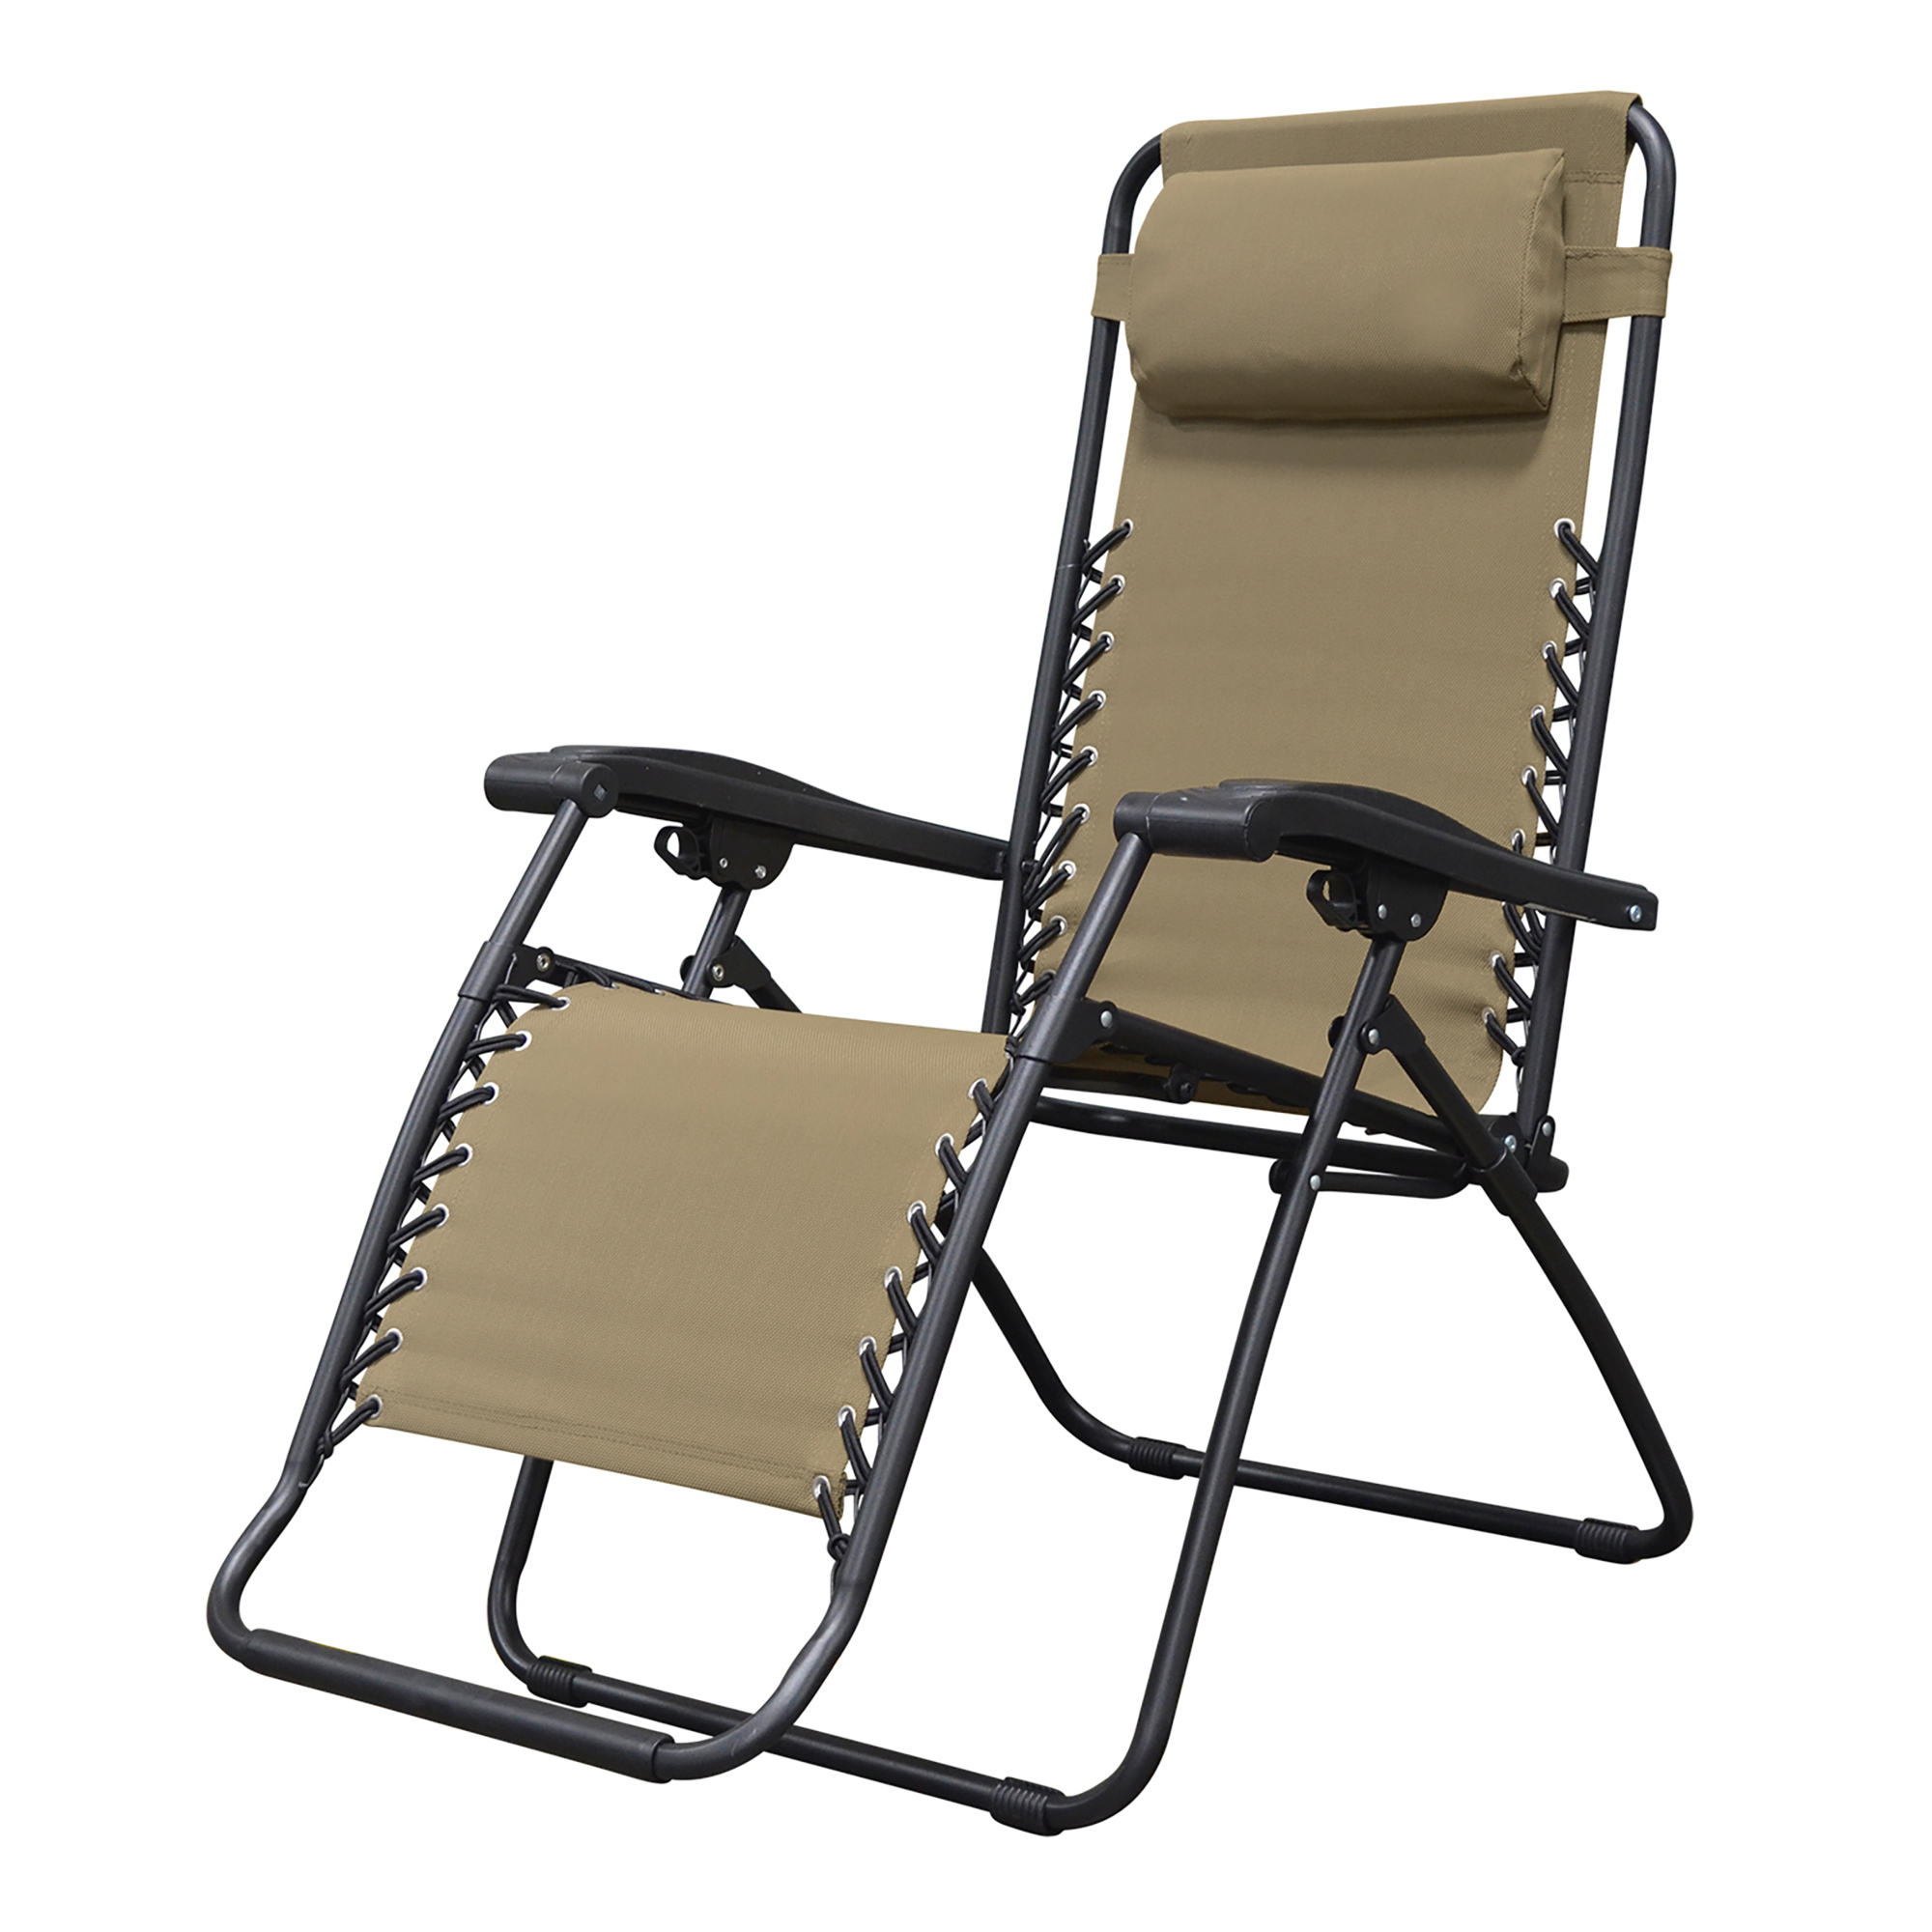 Caravan Canopy, Infinity Zero Gravity Chair Lounger, Primary Color Beige, Material Textile, Width 27.16 in, Model 80009000150